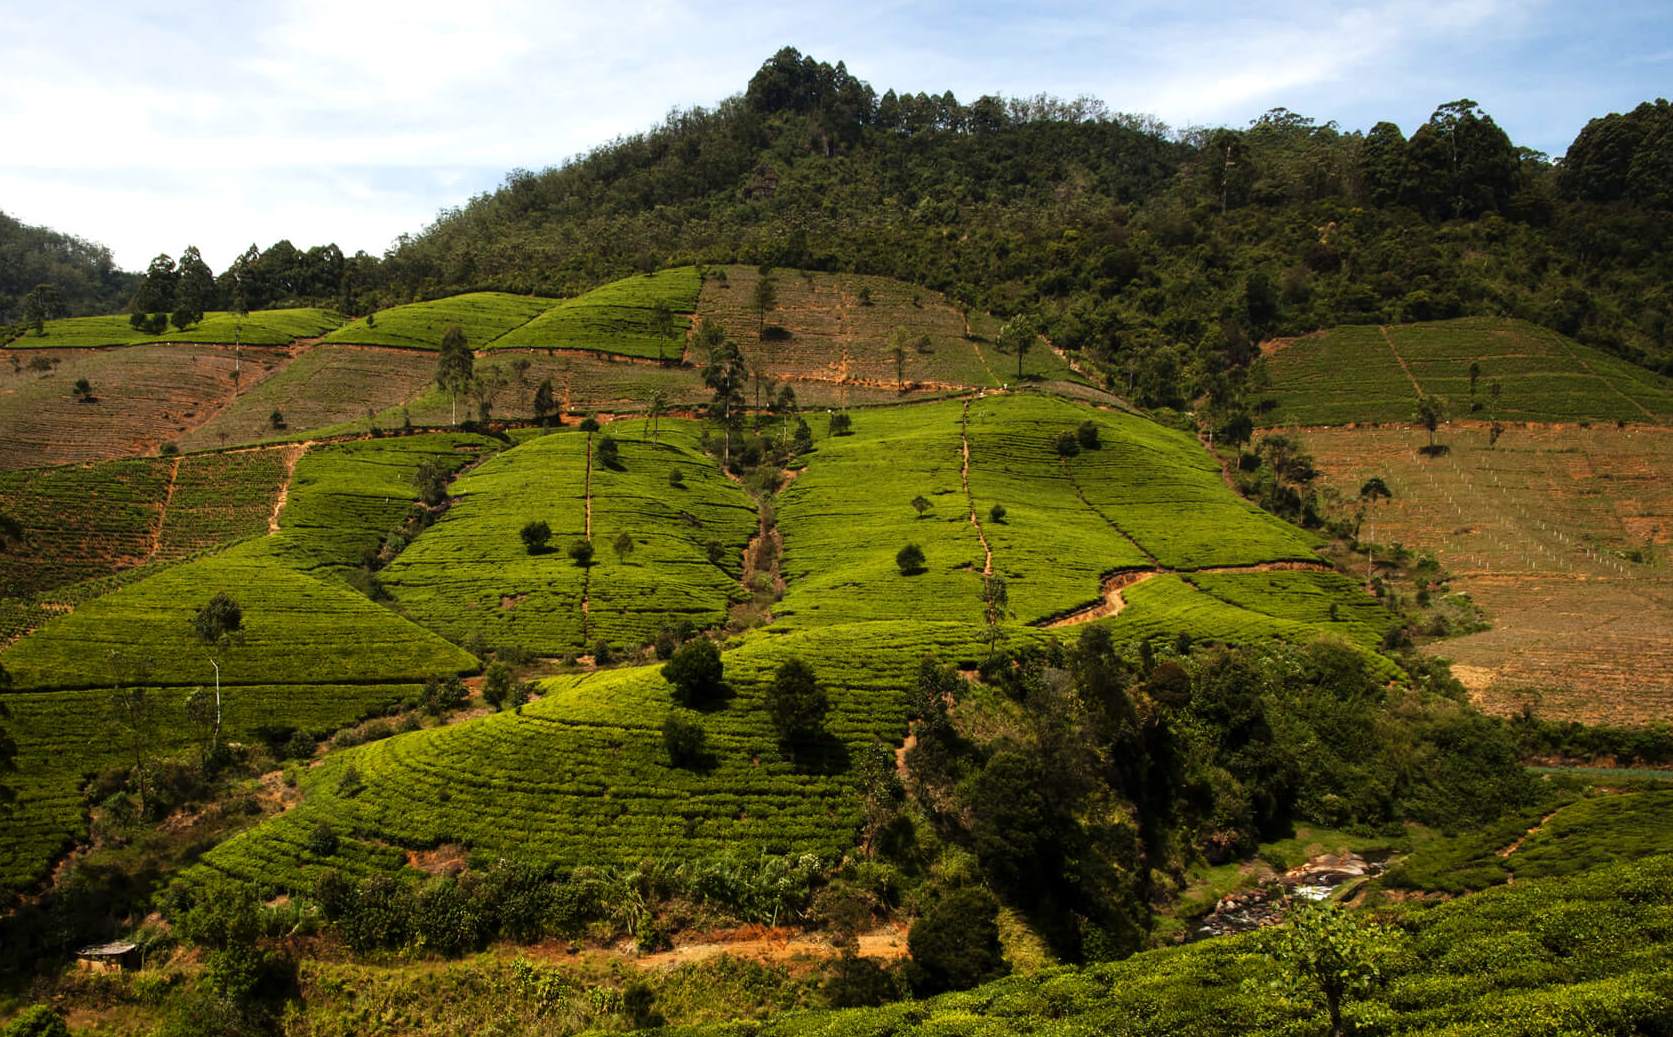 Farming Pure Ceylon Tea - Picture Shows a Conventional Tea Plantation in the Central Highlands